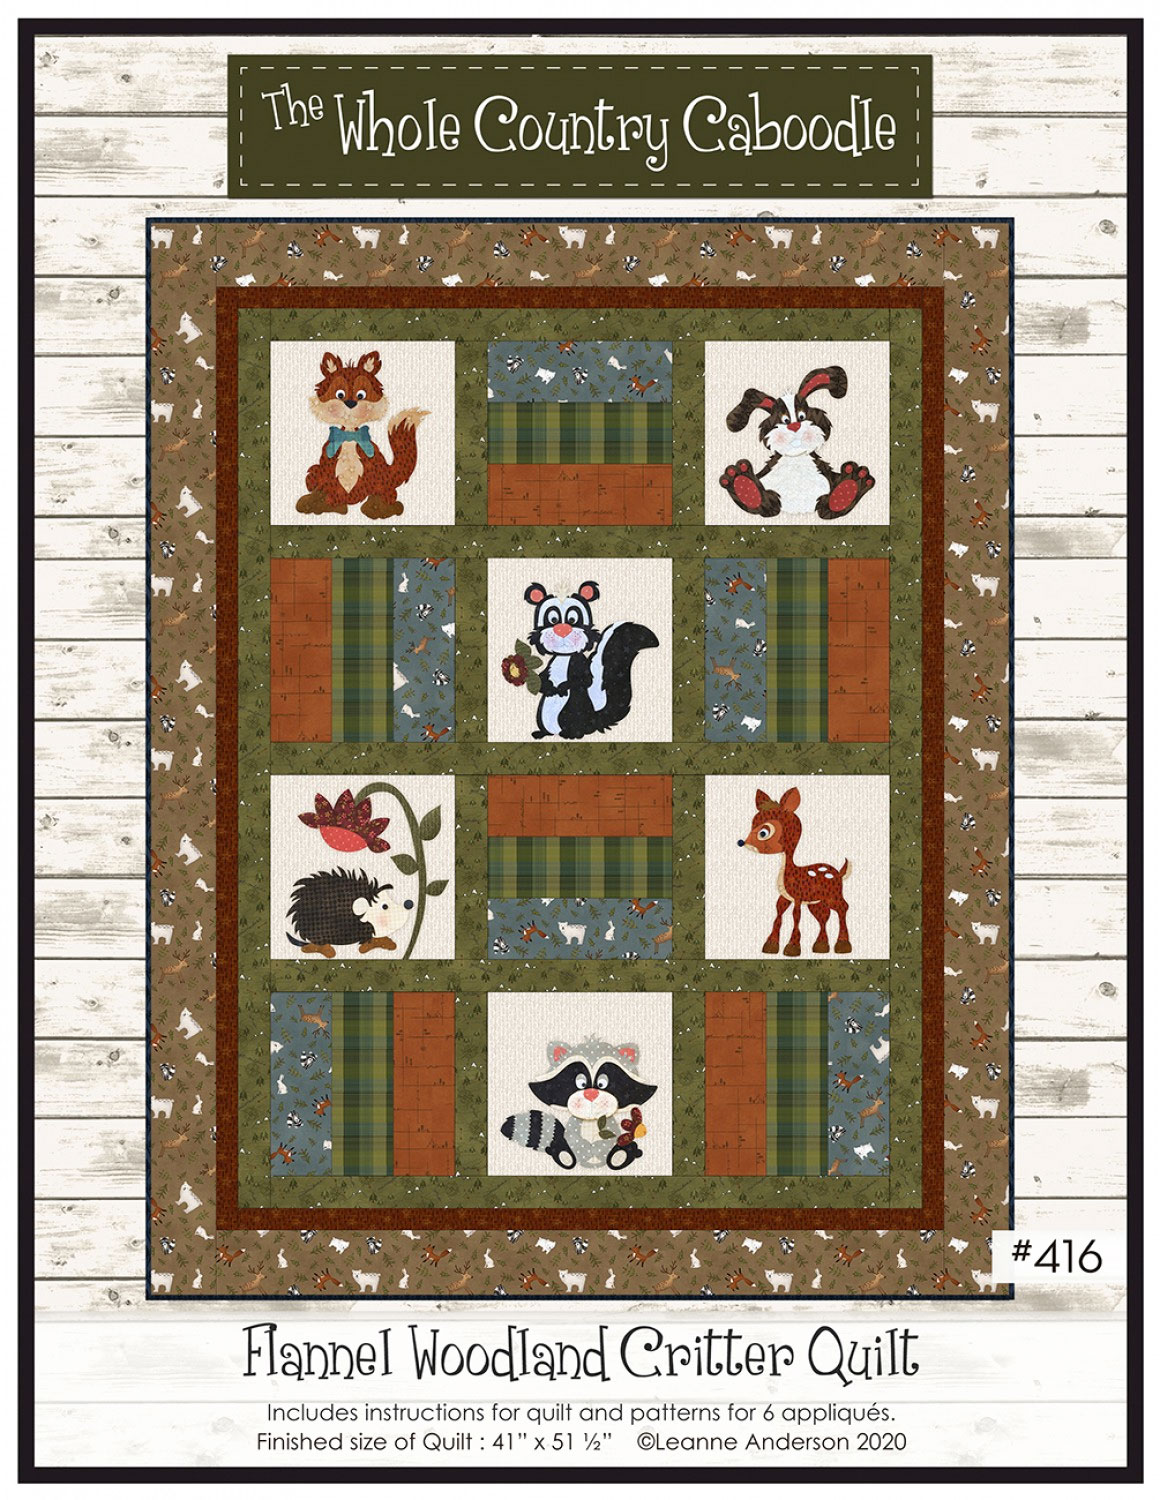 Flannel-Woodland-Critter-quilt-sewing-pattern-The-Whole-Country-Caboodle-front